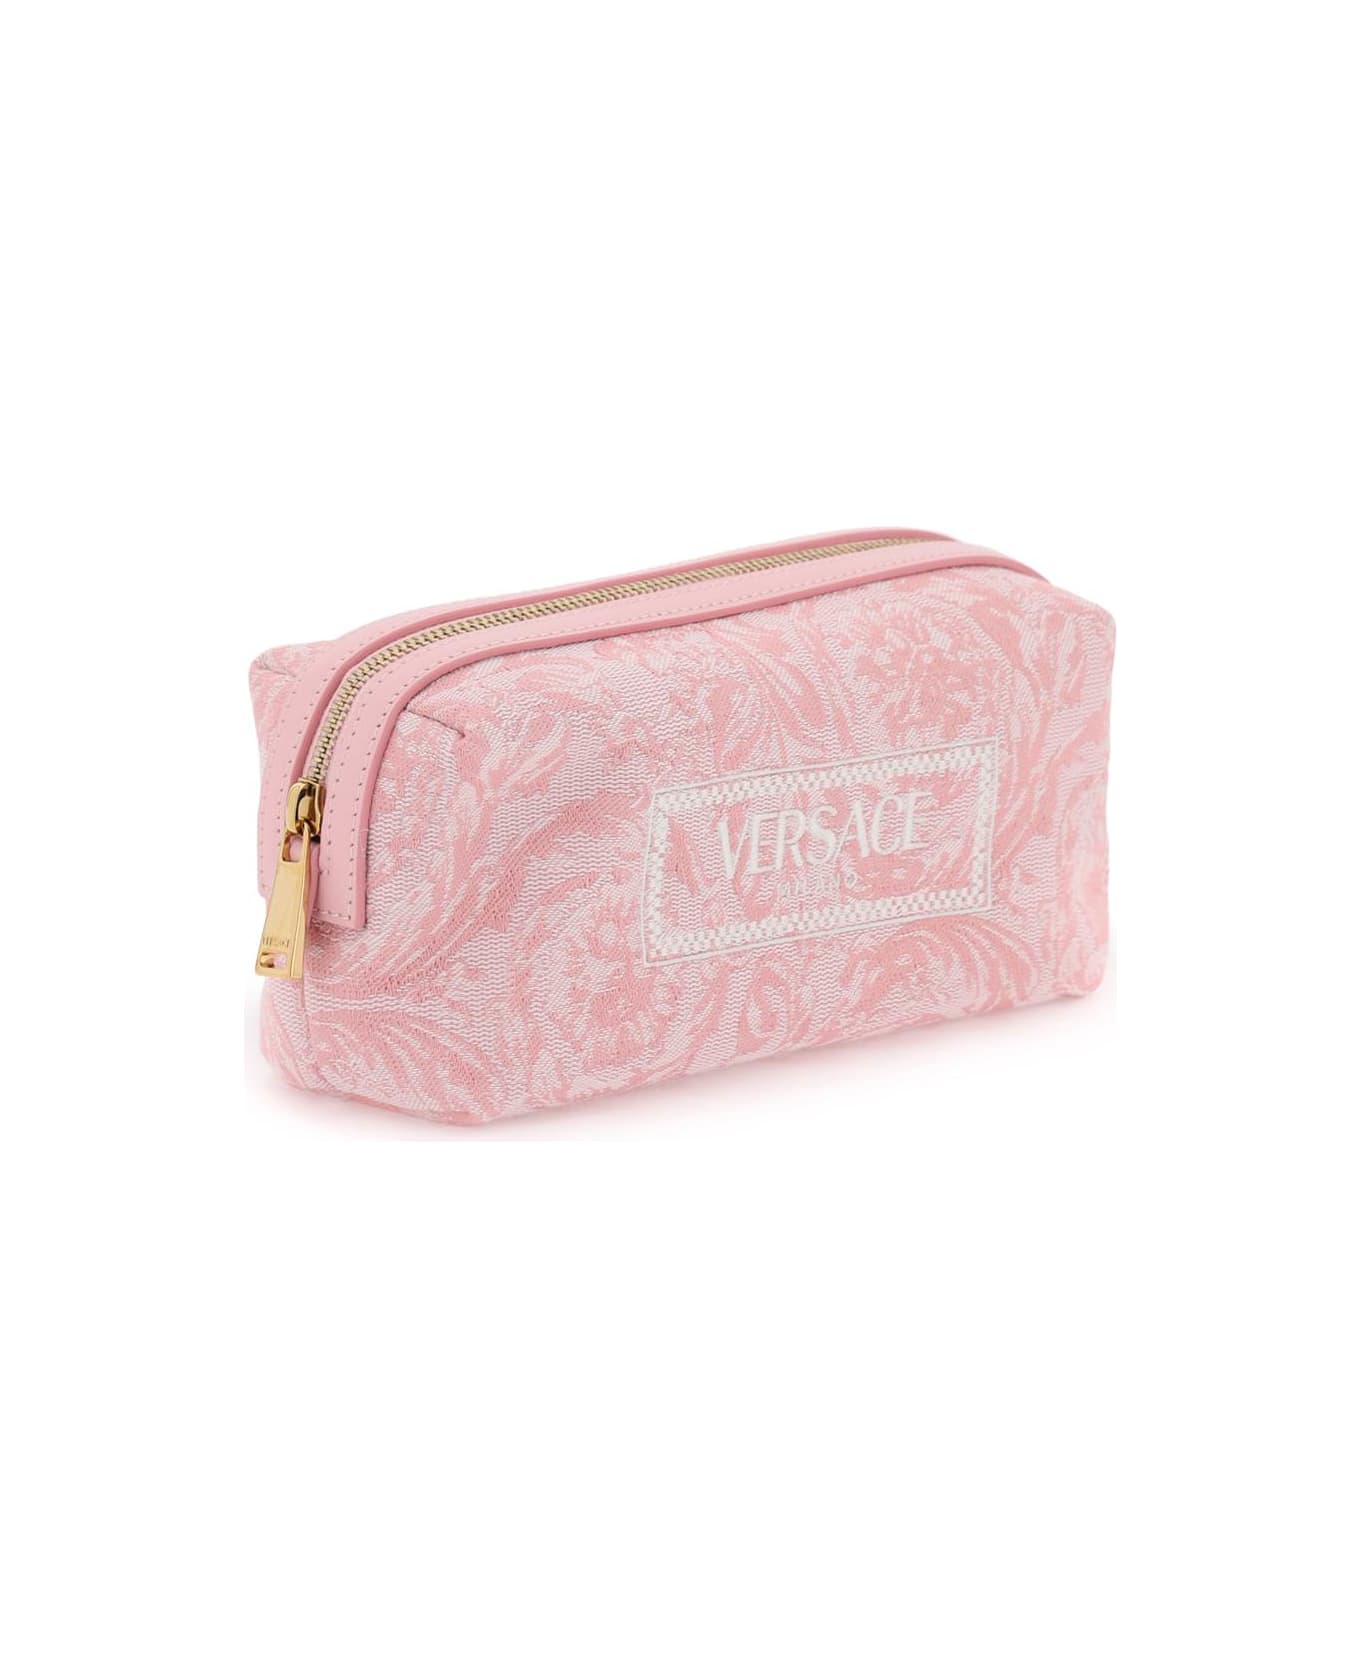 Versace Logo-embroidered Jacquard Zip-up Toiletry Bag - PALE PINK ENGLISH ROSE VE (Pink)